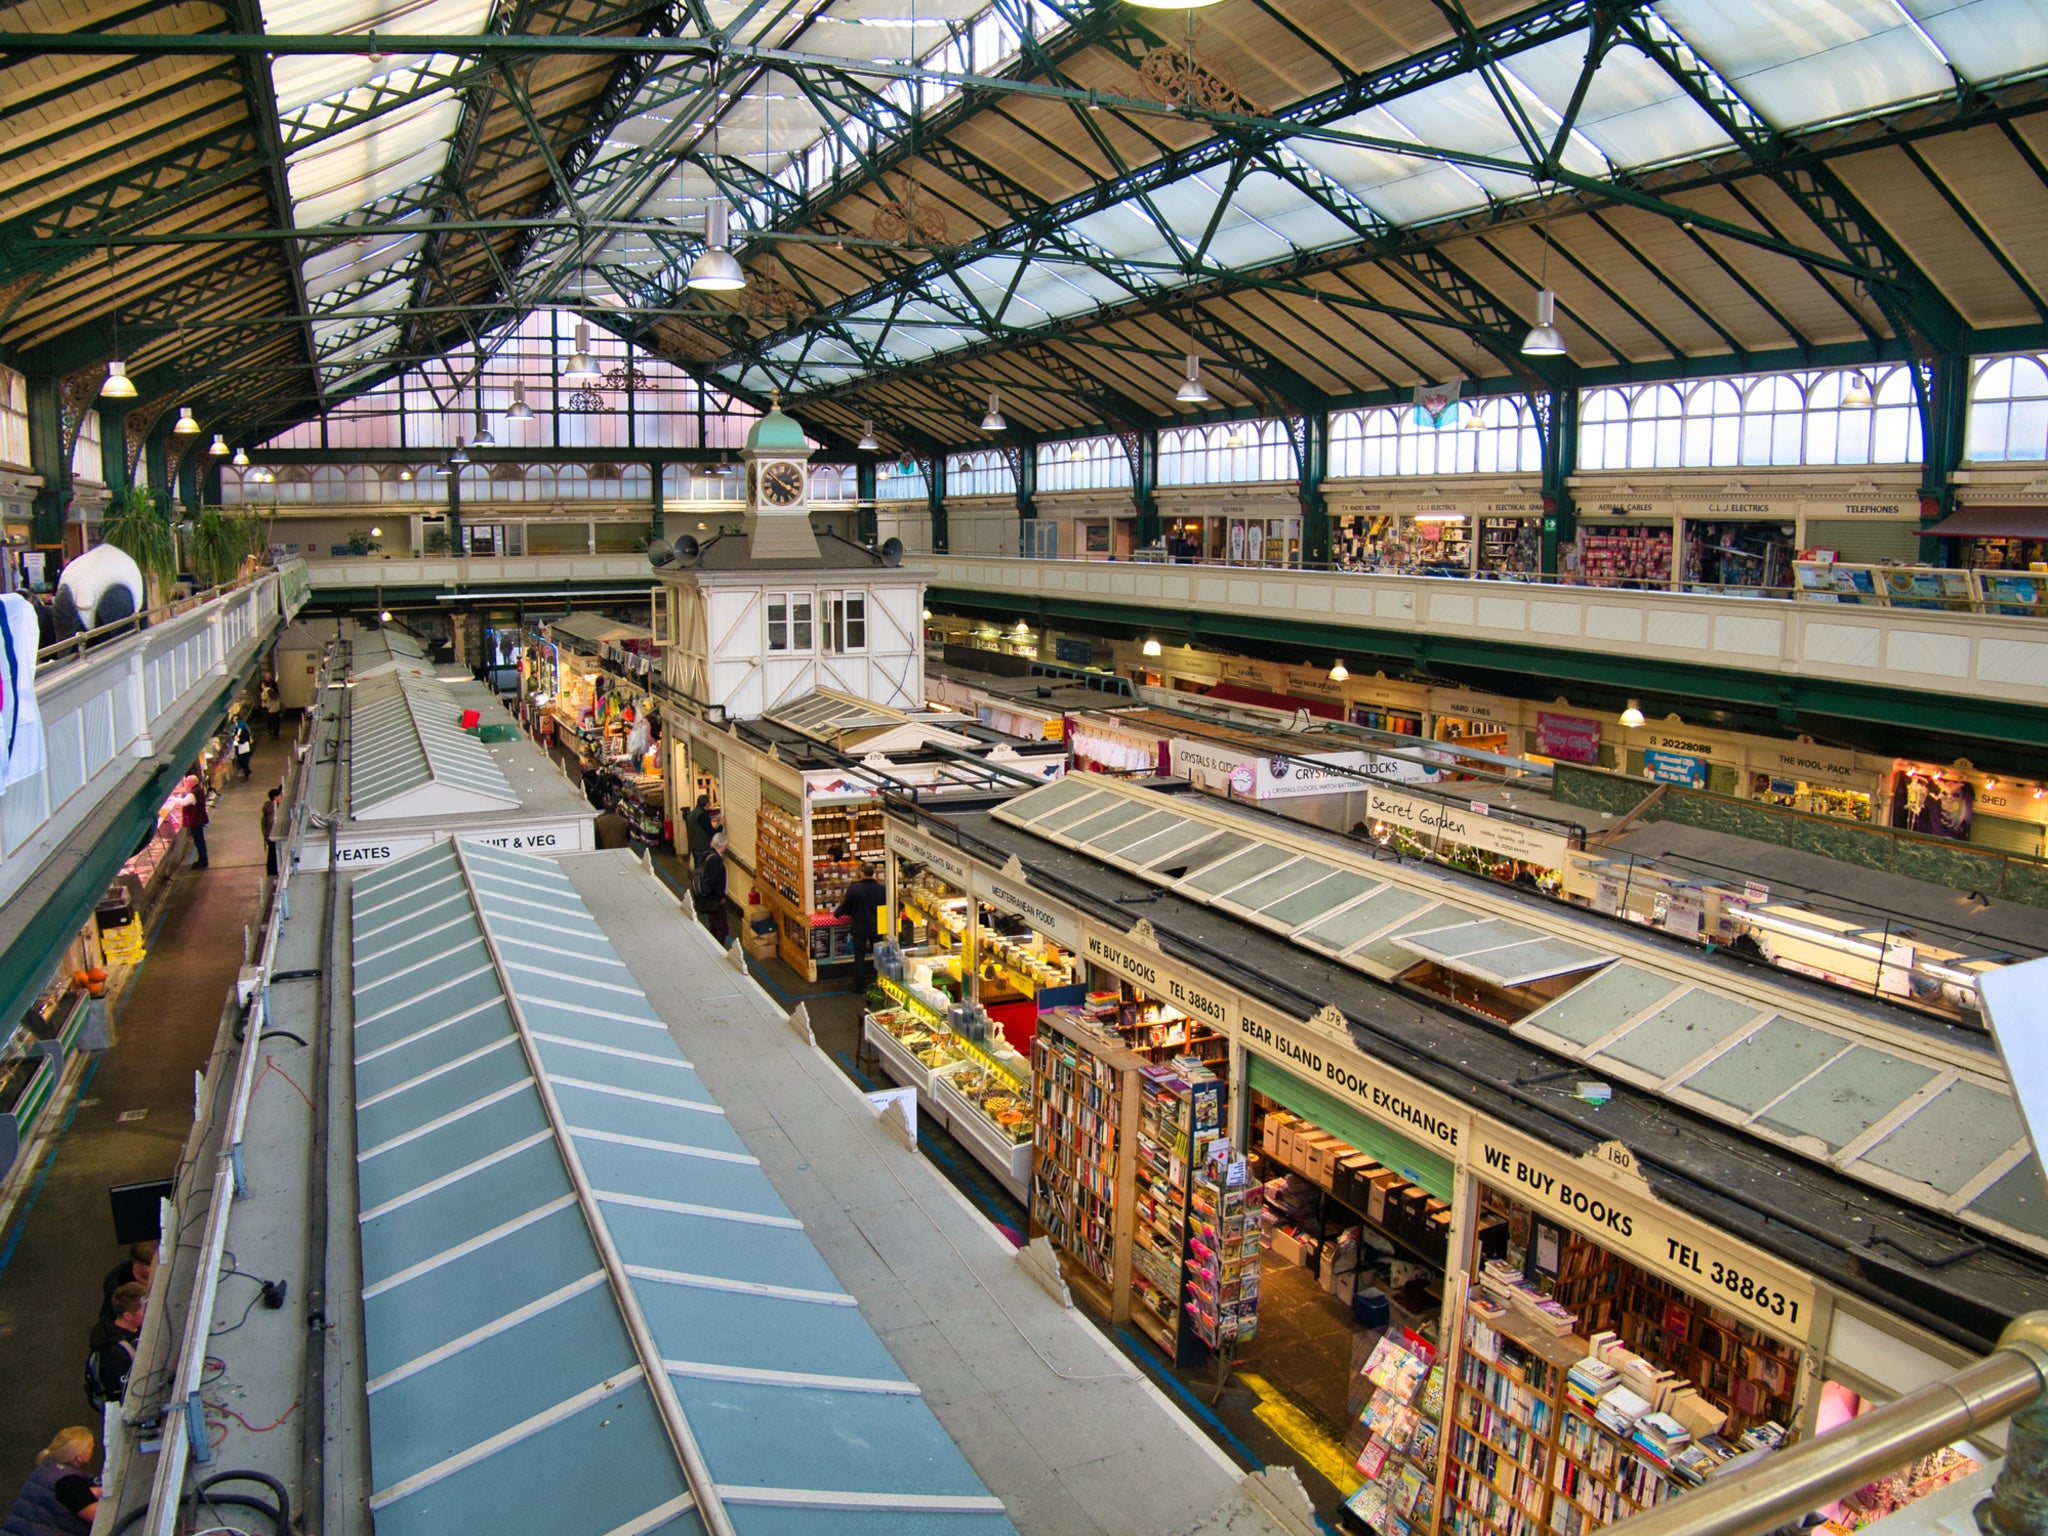 The traditional Victorian design of Cardiff’s indoor market has been preserved – and it’s still a bustling place to shop